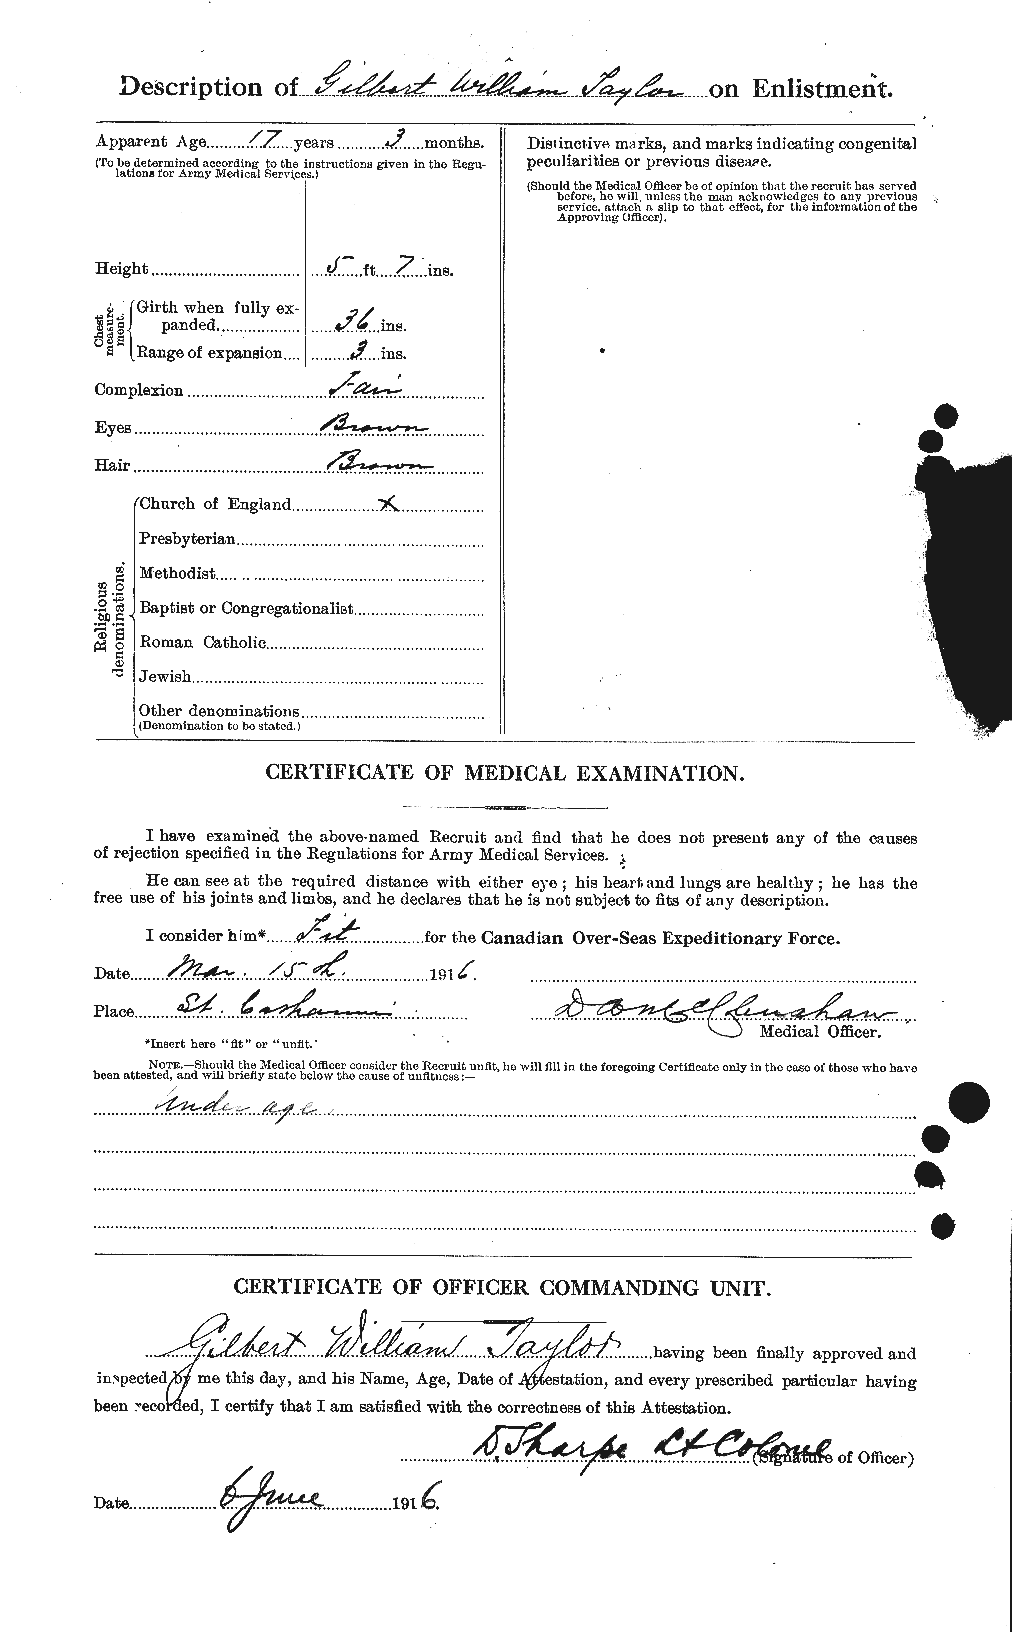 Personnel Records of the First World War - CEF 626381b